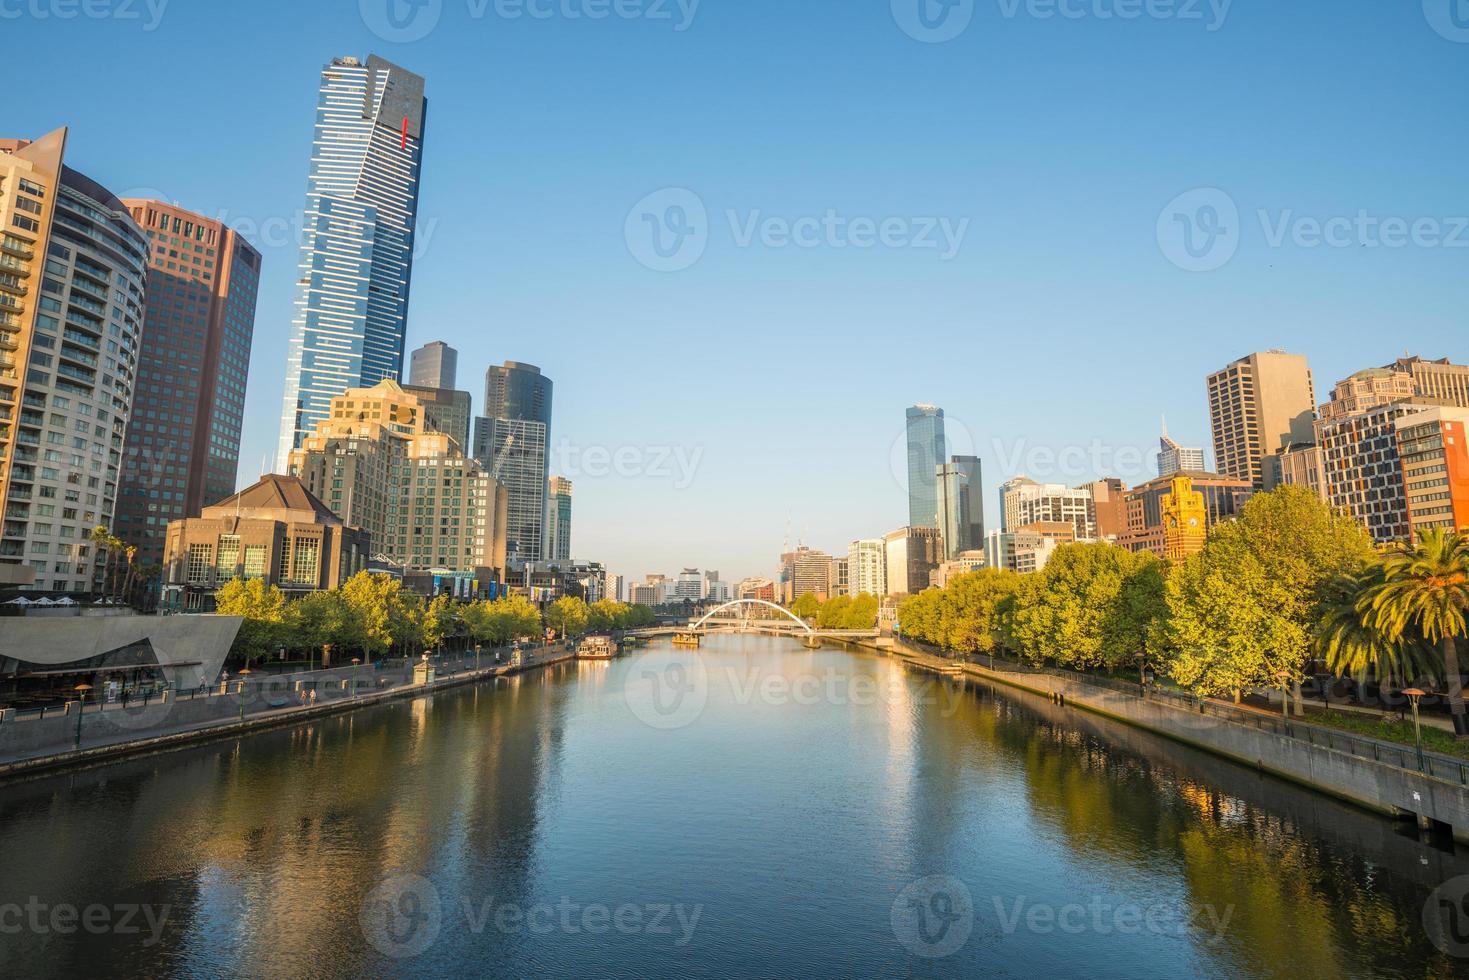 Cityscape of Melbourne city with Yarra river run through city. Melbourne city CBD one of the most liveable city in the world of Australia. photo